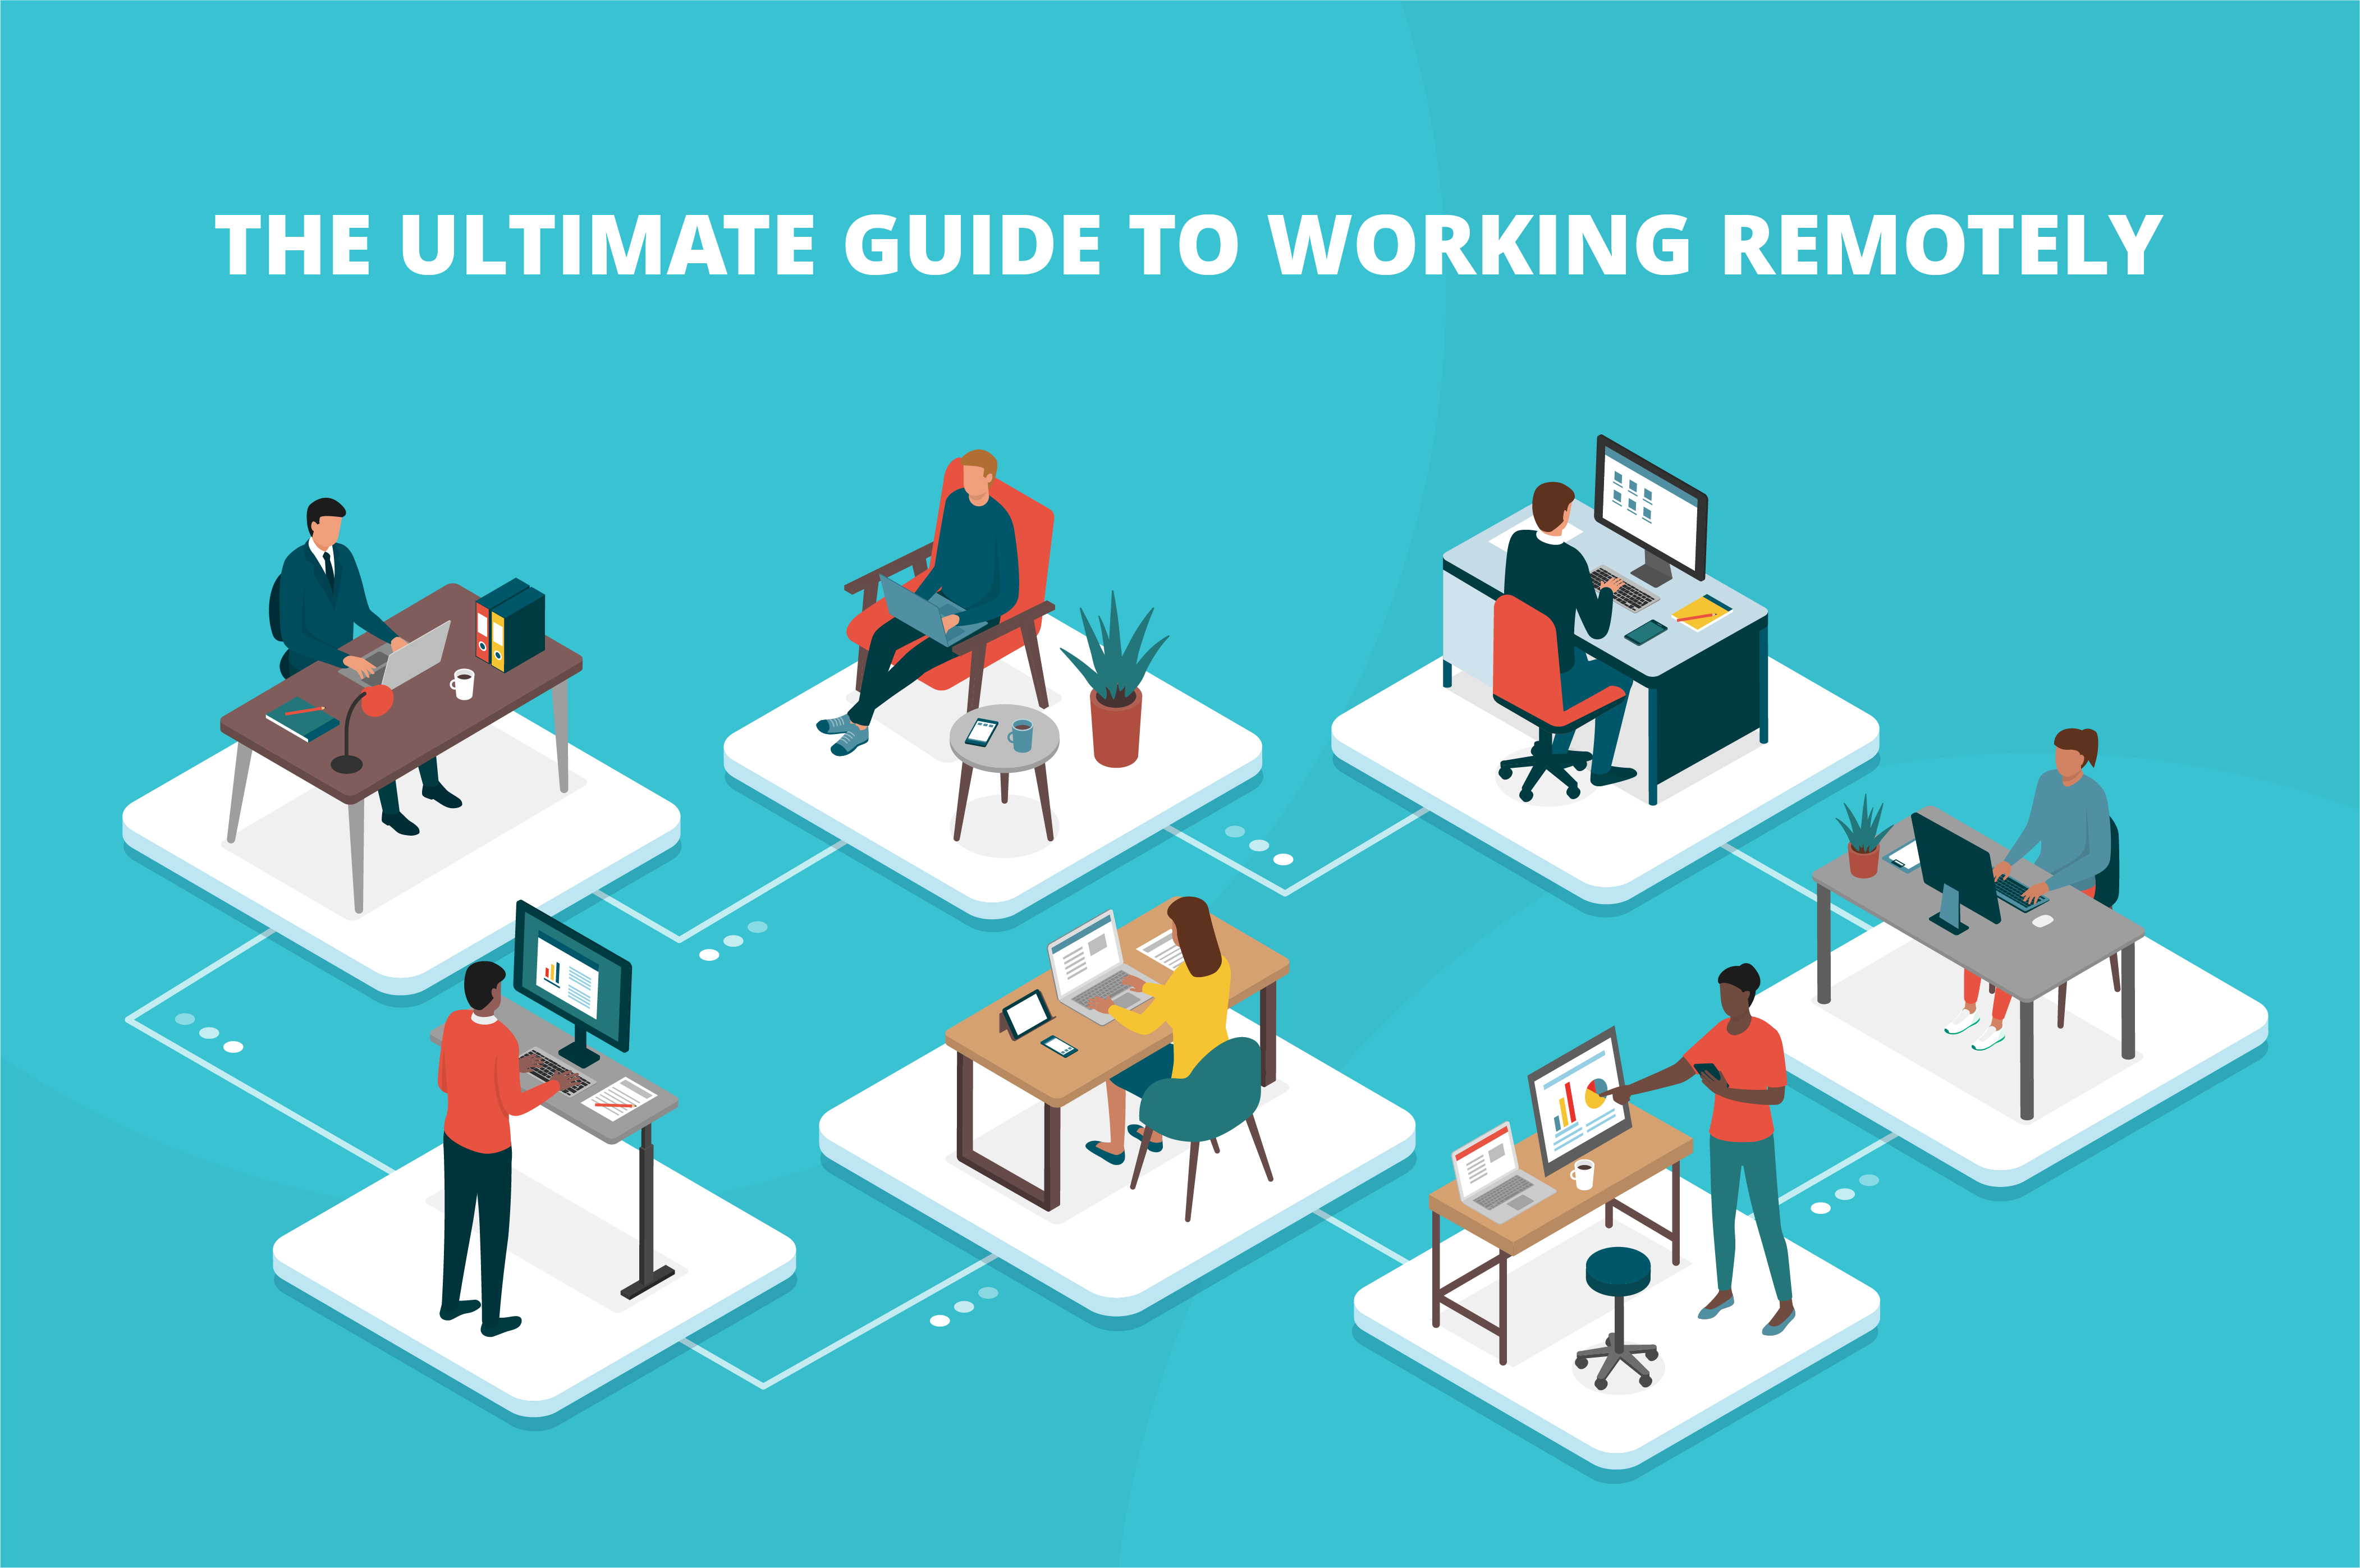 An illustration of employees sitting at desks and collaborating, while working remotely.